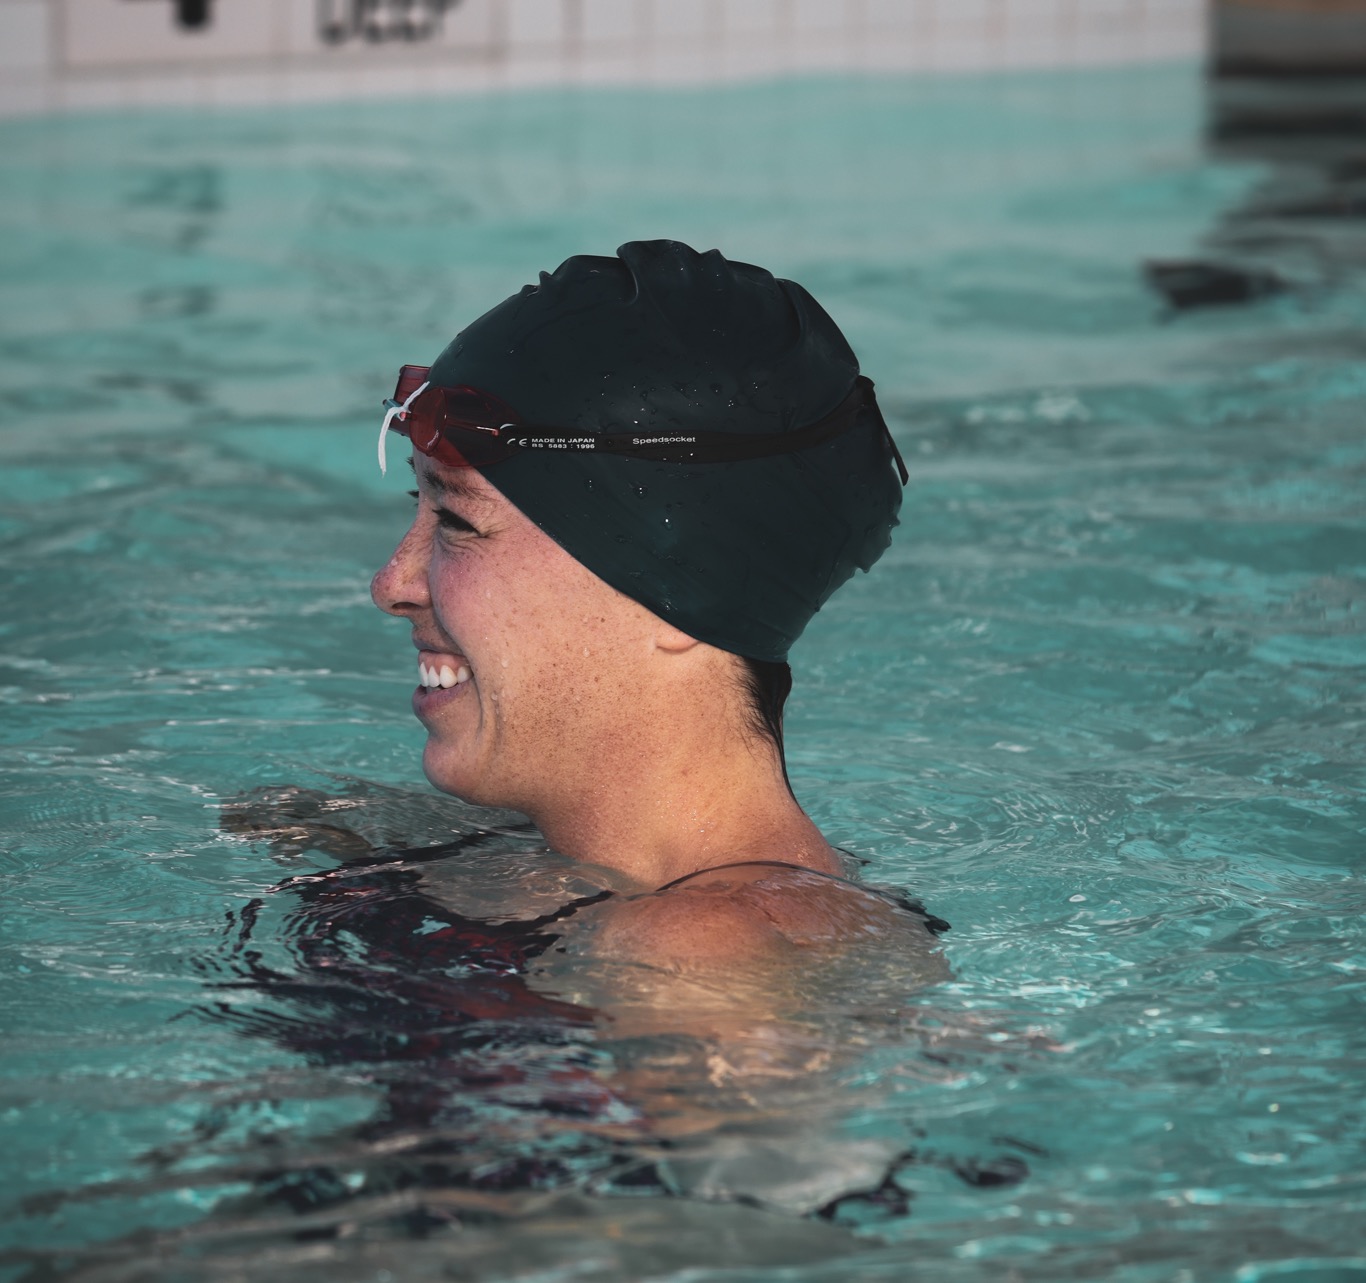 Former Collegiate Swimmer, Kate Krause, Brings Educational Swim Programs to Those Who Need it Most Through Non-Profit the Rising Tide Effect